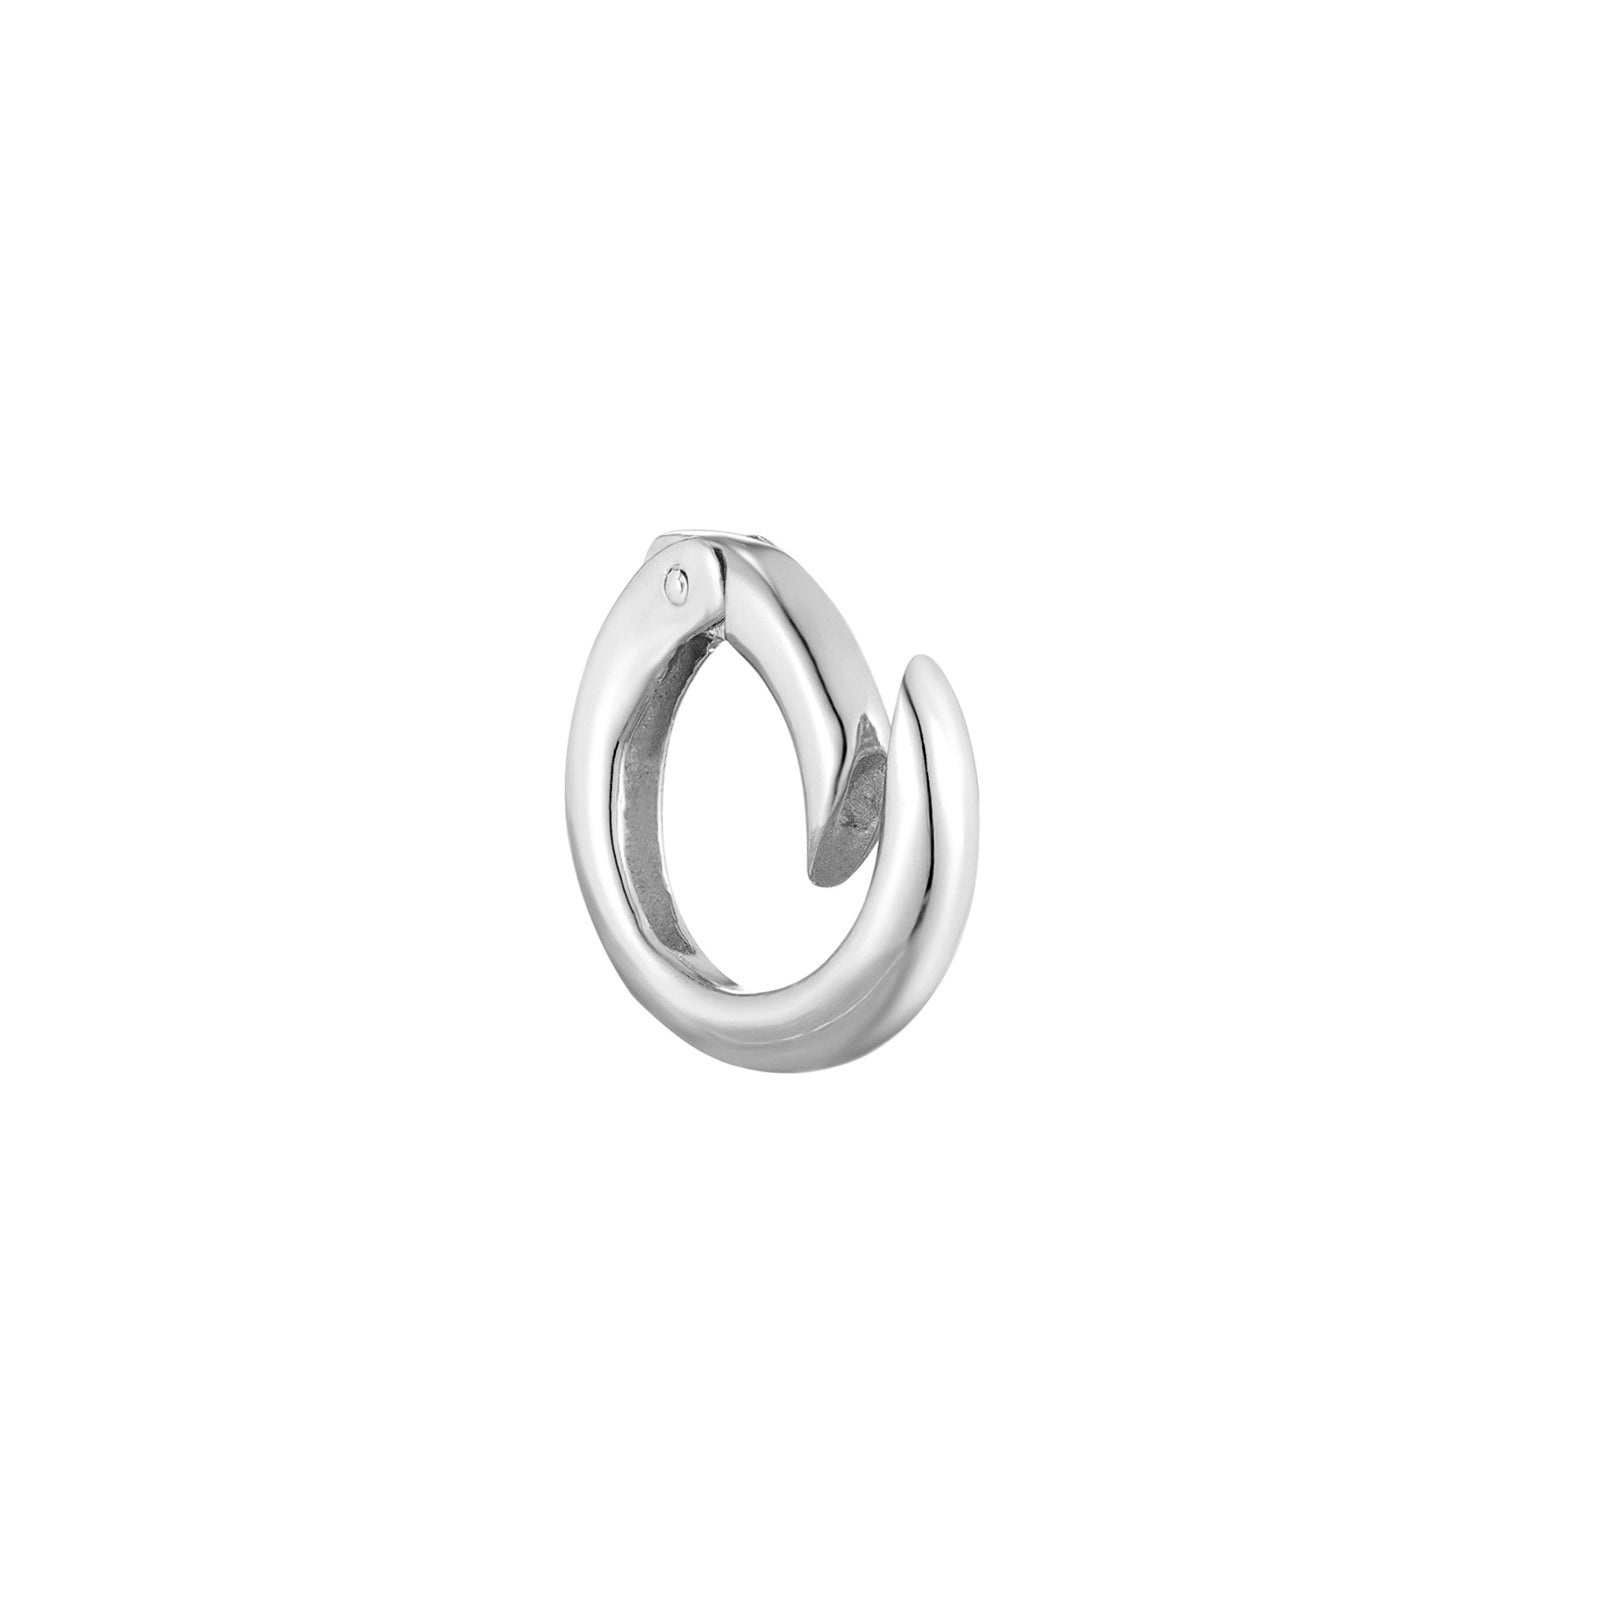 soph floyd - connector - silver clasp - silver charm - seolgold